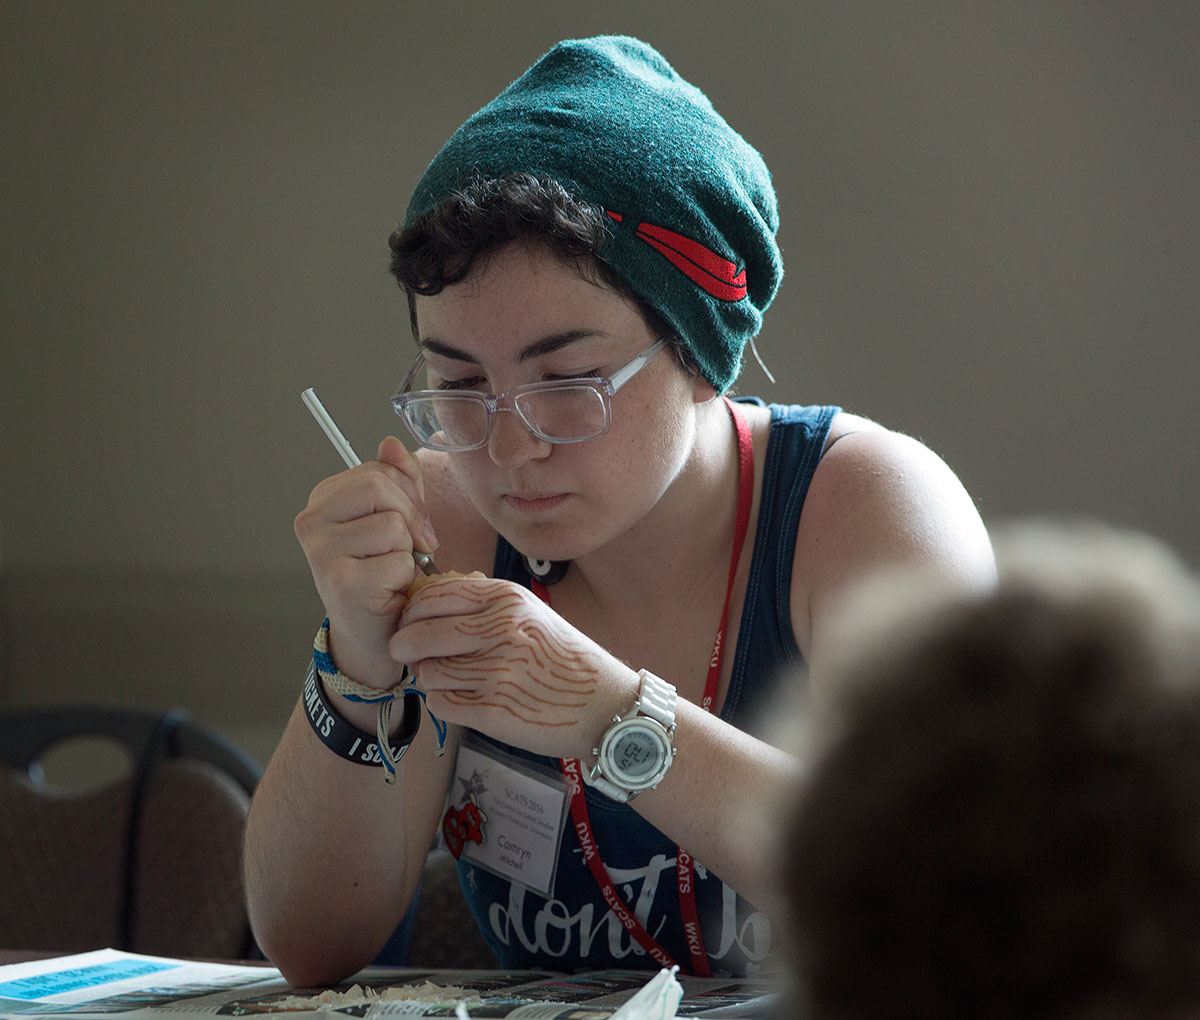 Camryn Mitchell from Mount Juliet, Tennessee, works on her wax carving in Travel the World through Art on Tuesday, June 21. (Photo by Tucker Allen Covey)